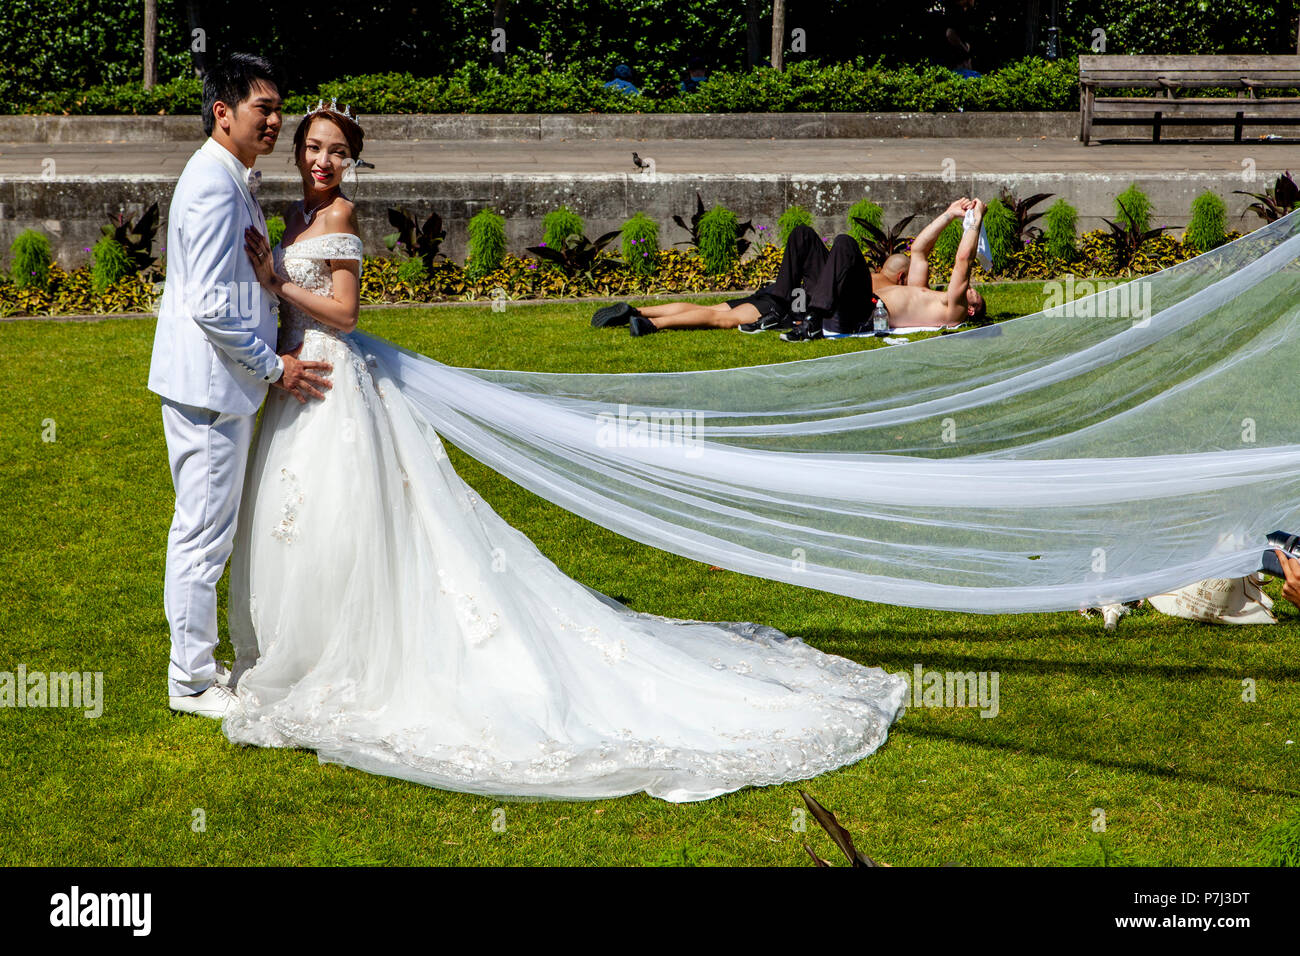 A Visiting Bride and Groom From Hong Kong Pose For Wedding Photography On The Lawns Outside St Paul’s Cathedral, London, England Stock Photo